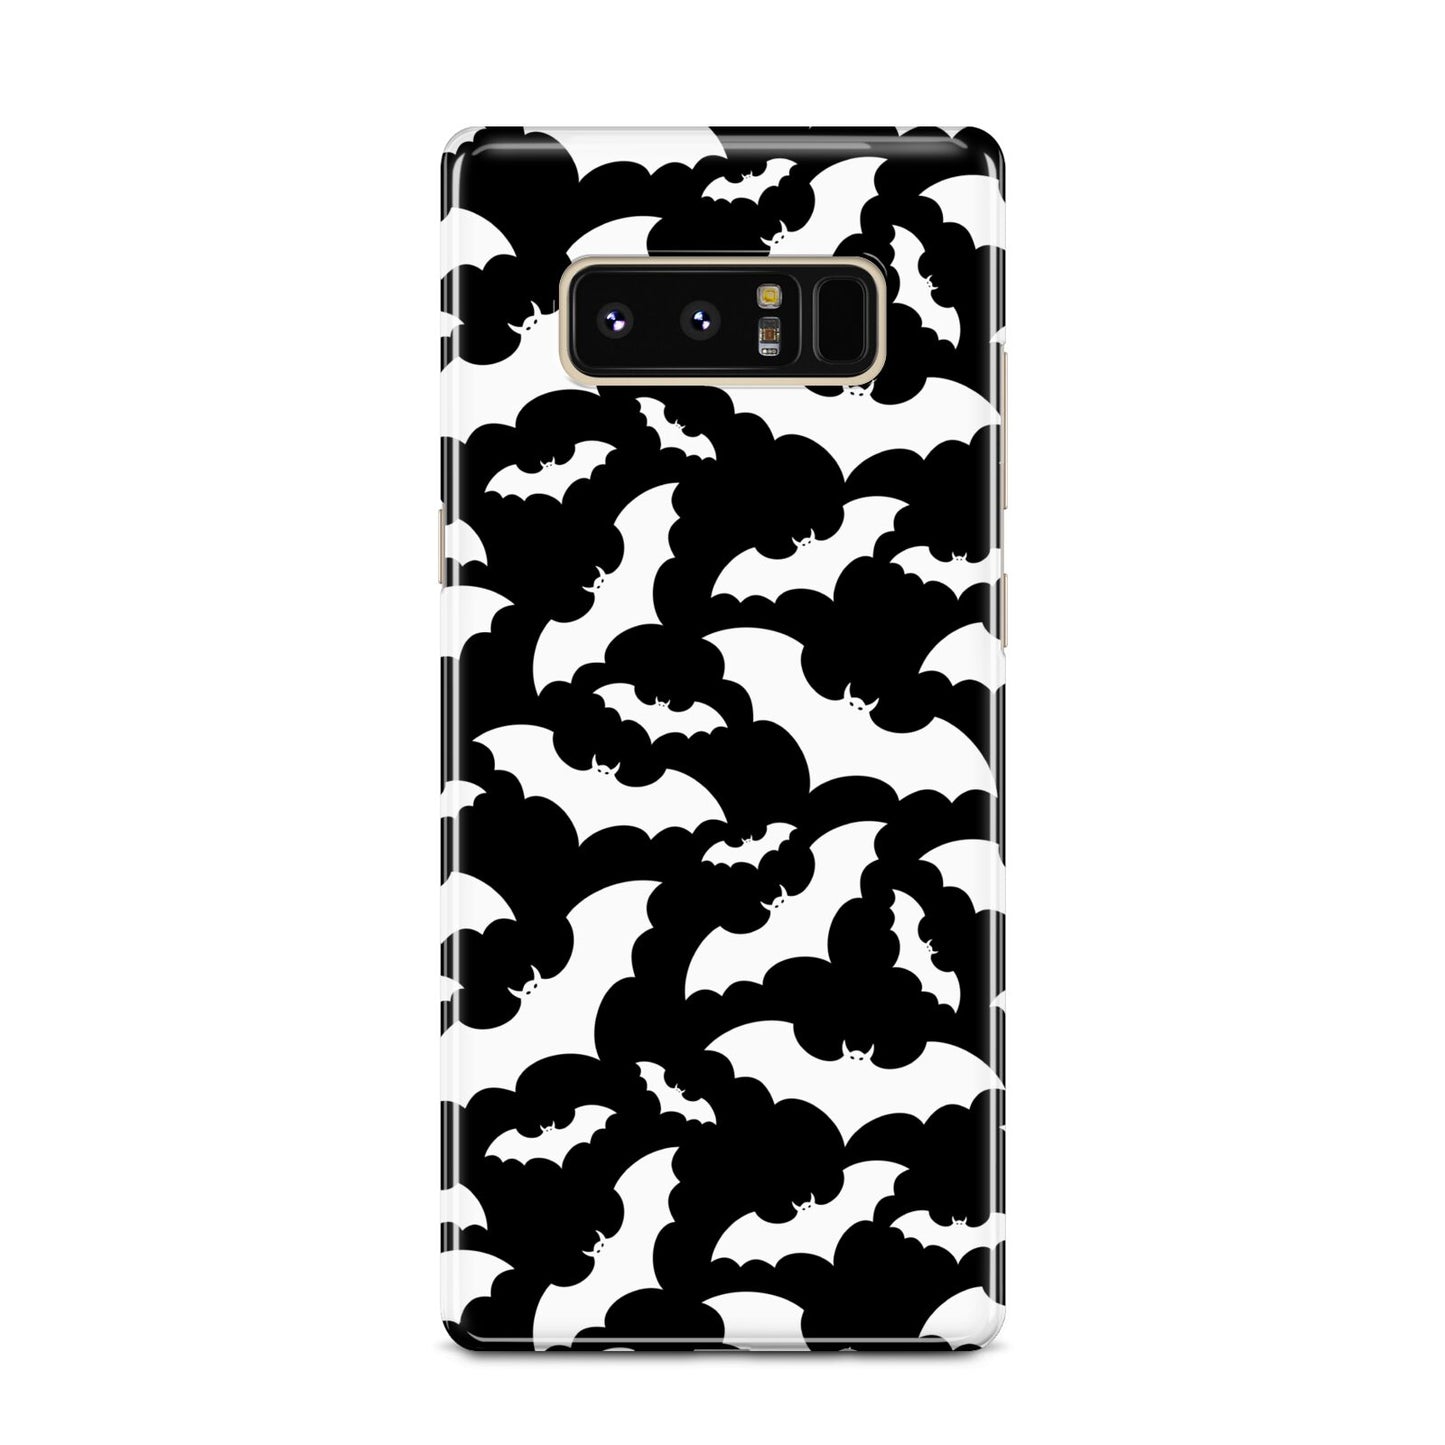 Black and White Bats Samsung Galaxy Note 8 Case